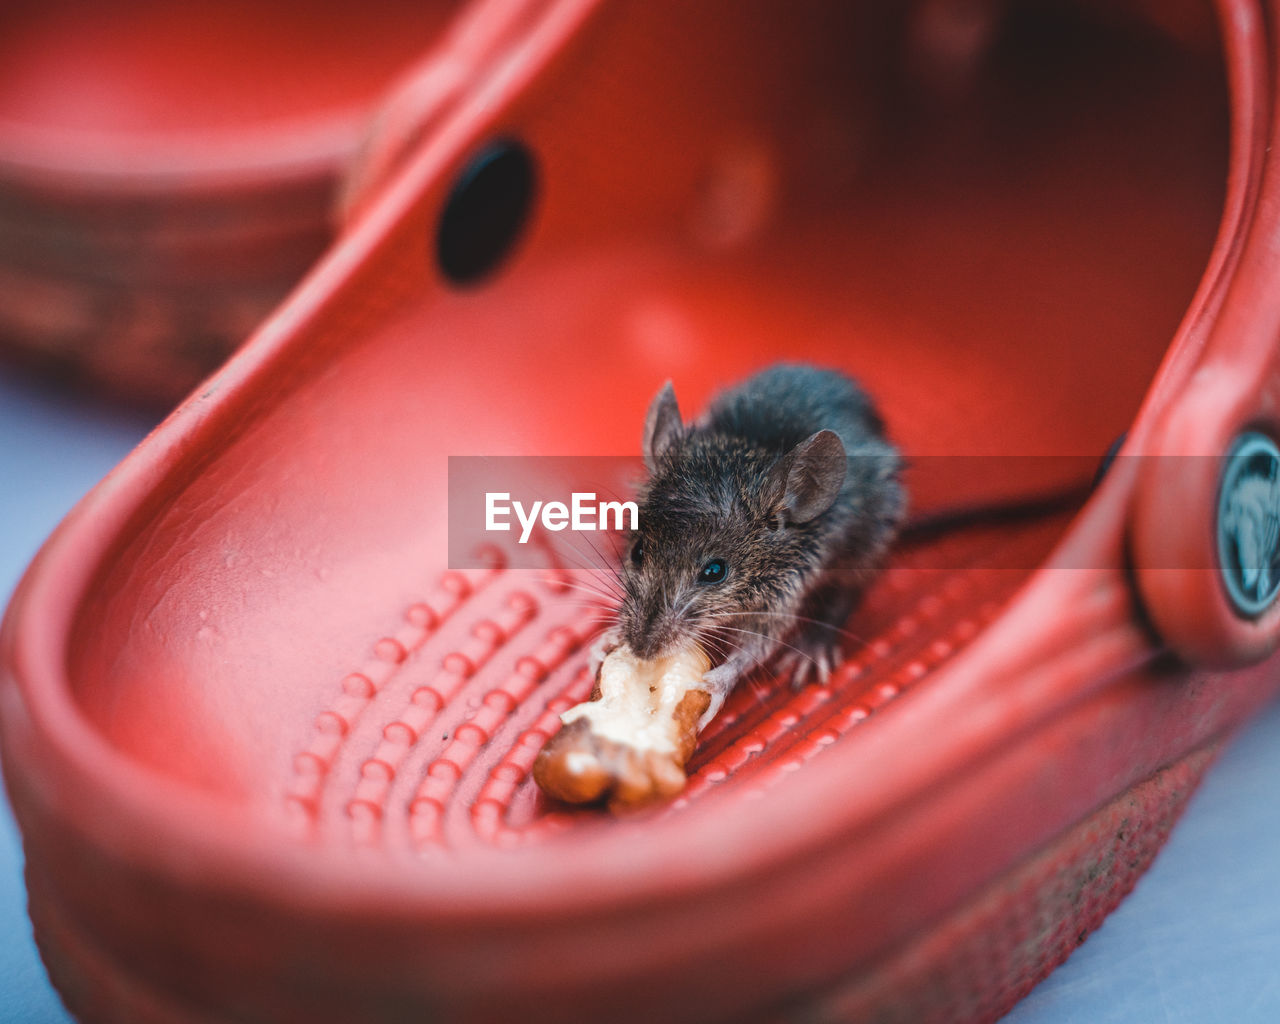 Mouse in a red shoe eating a nut